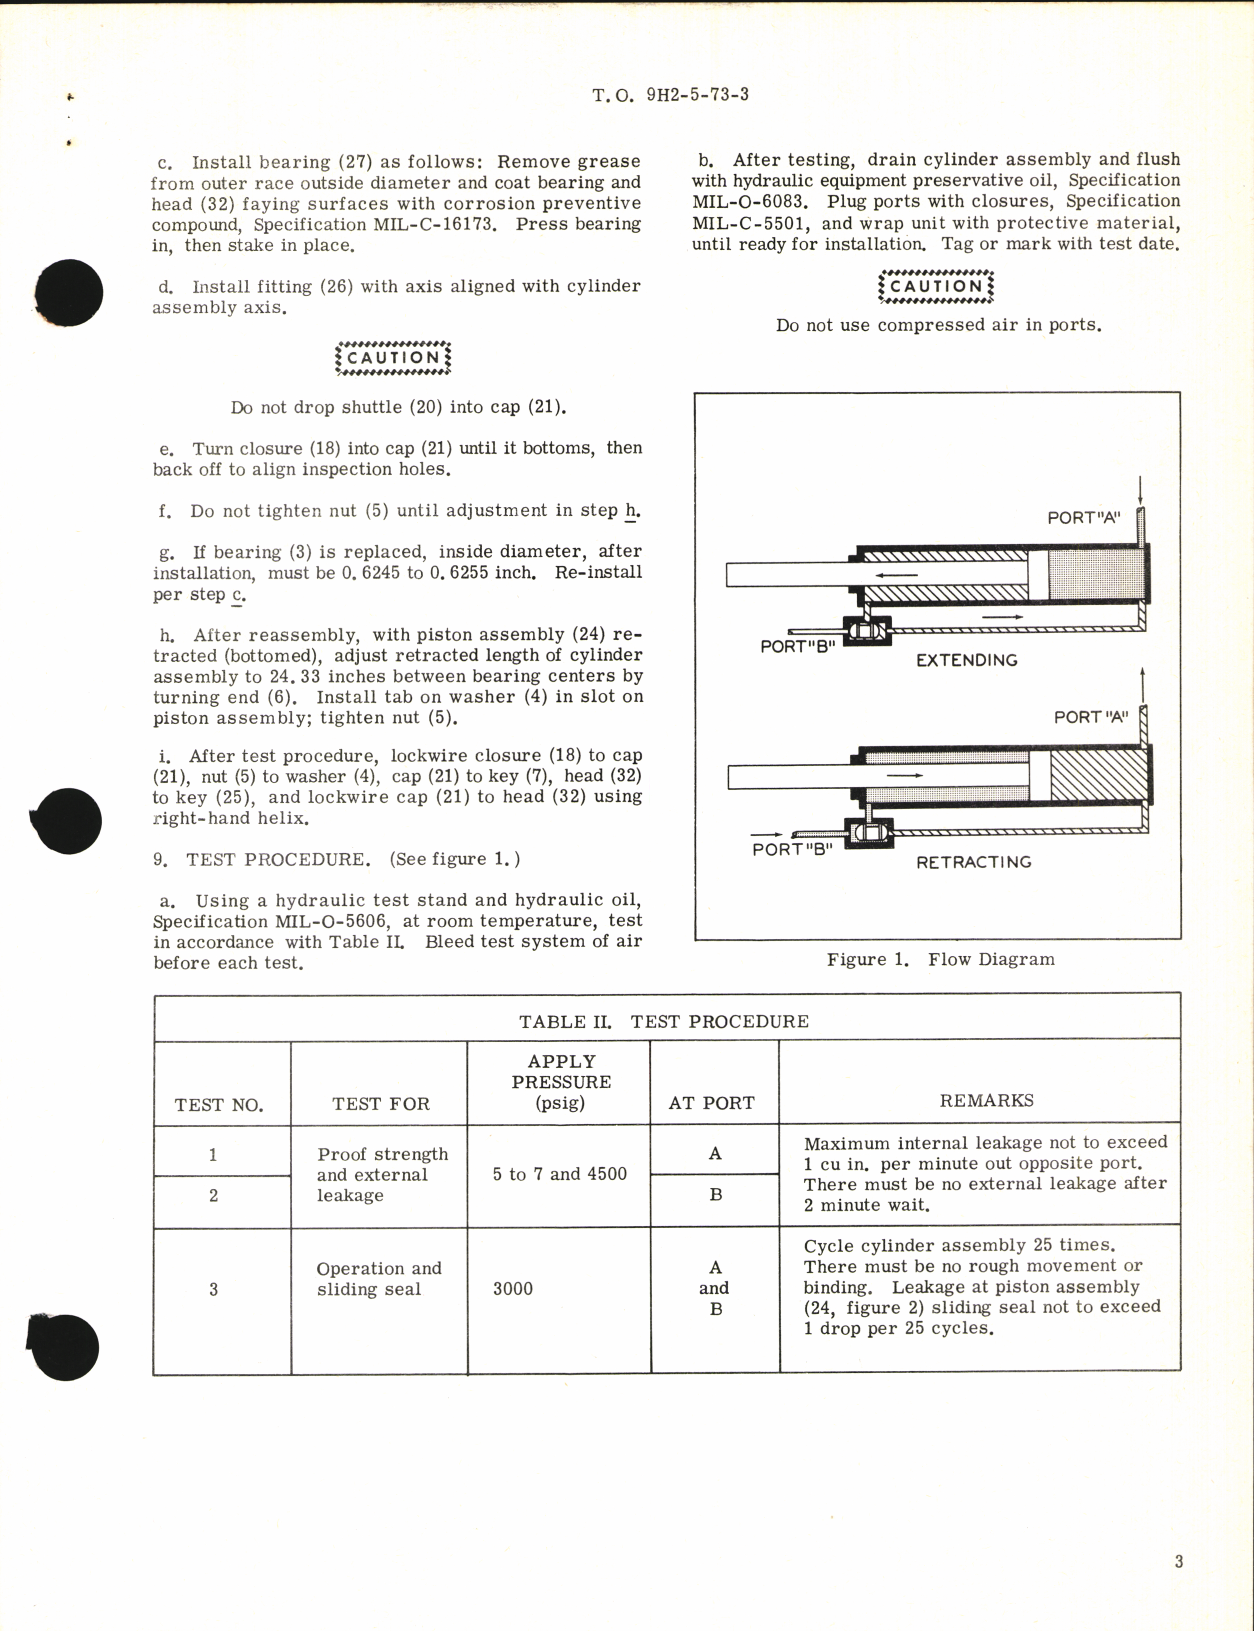 Sample page 3 from AirCorps Library document: Overhaul Instructions with Parts Breakdown for Forward Bomb door Cylinders